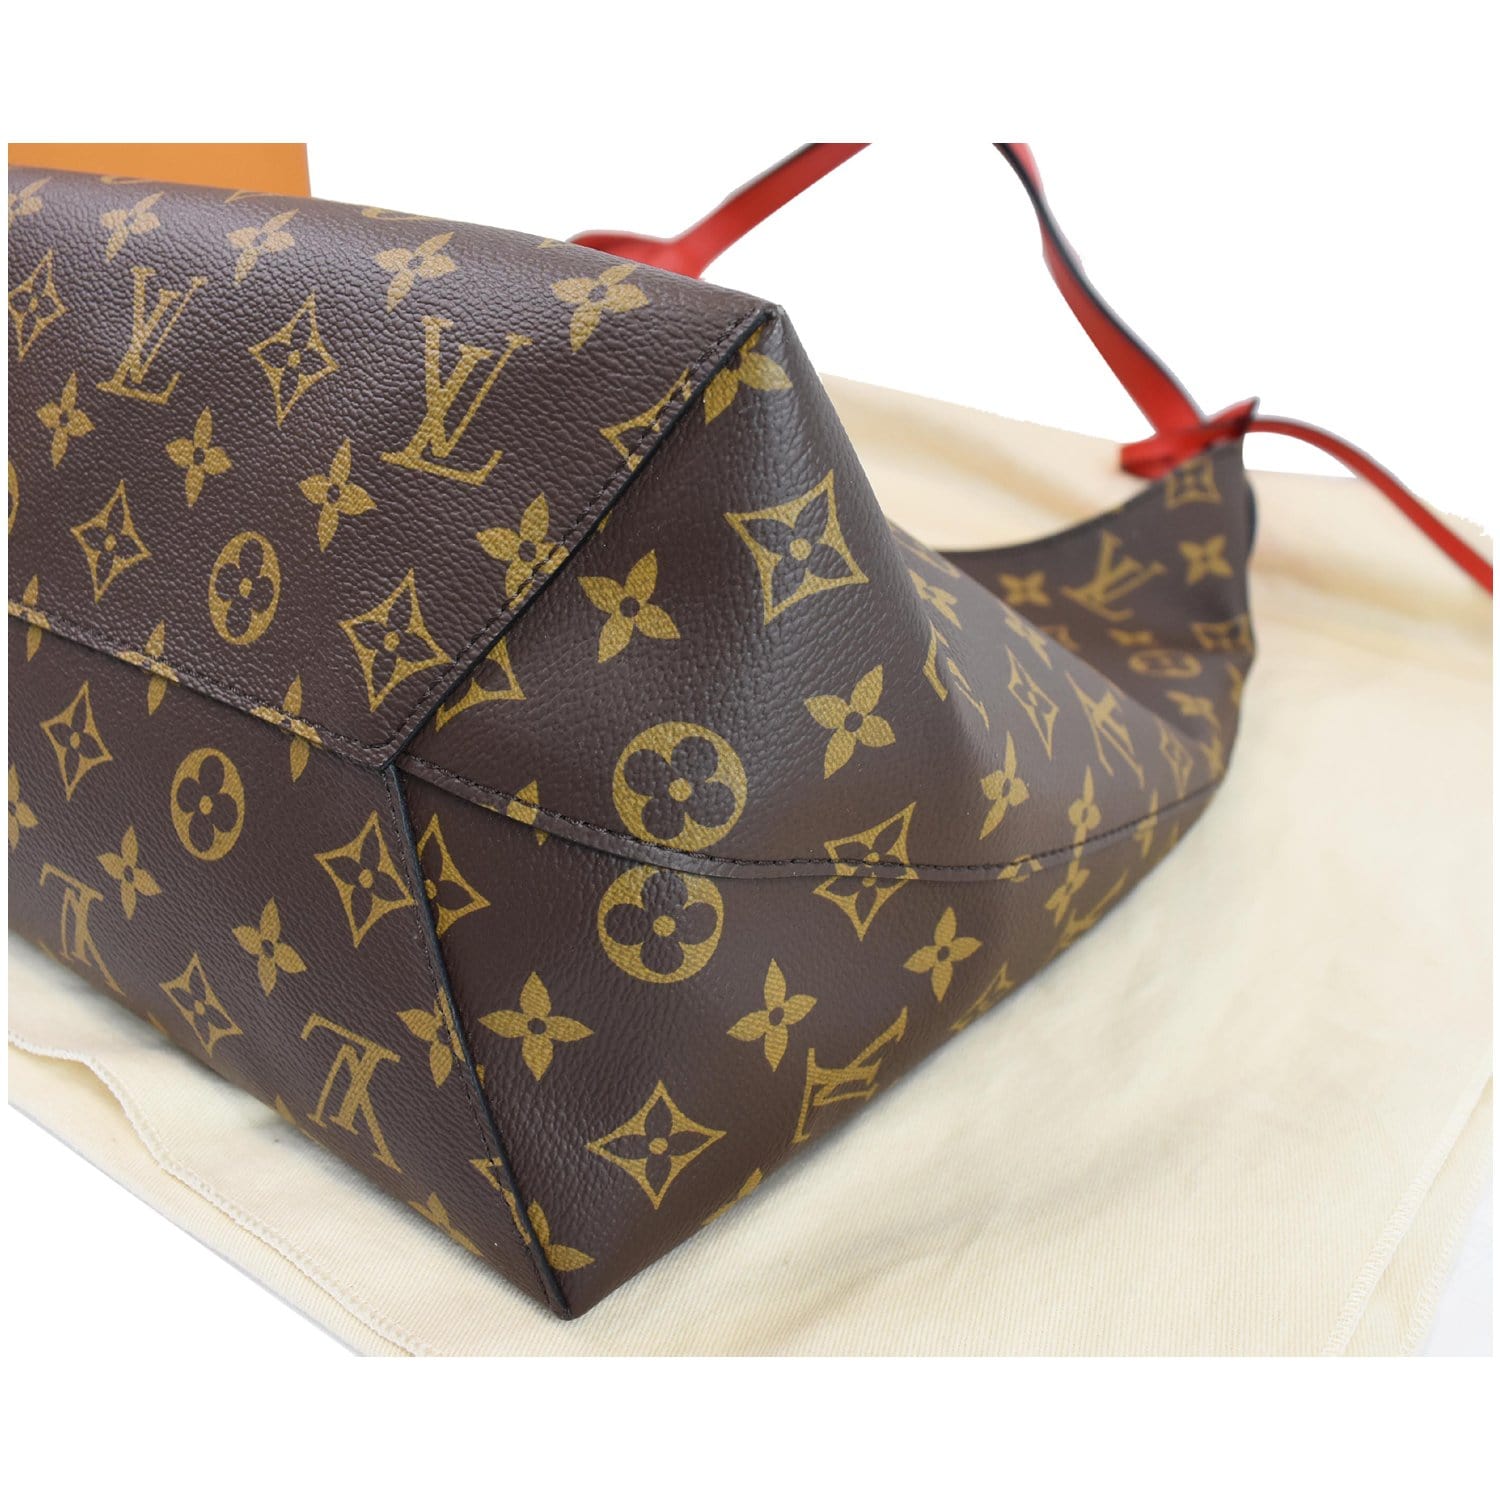 This Louis Vuitton Flower Monogram Canvas Hobo bag is remarkably stylish  and perfect for everyday bag!😍 #monogram #louisvuittonbag…